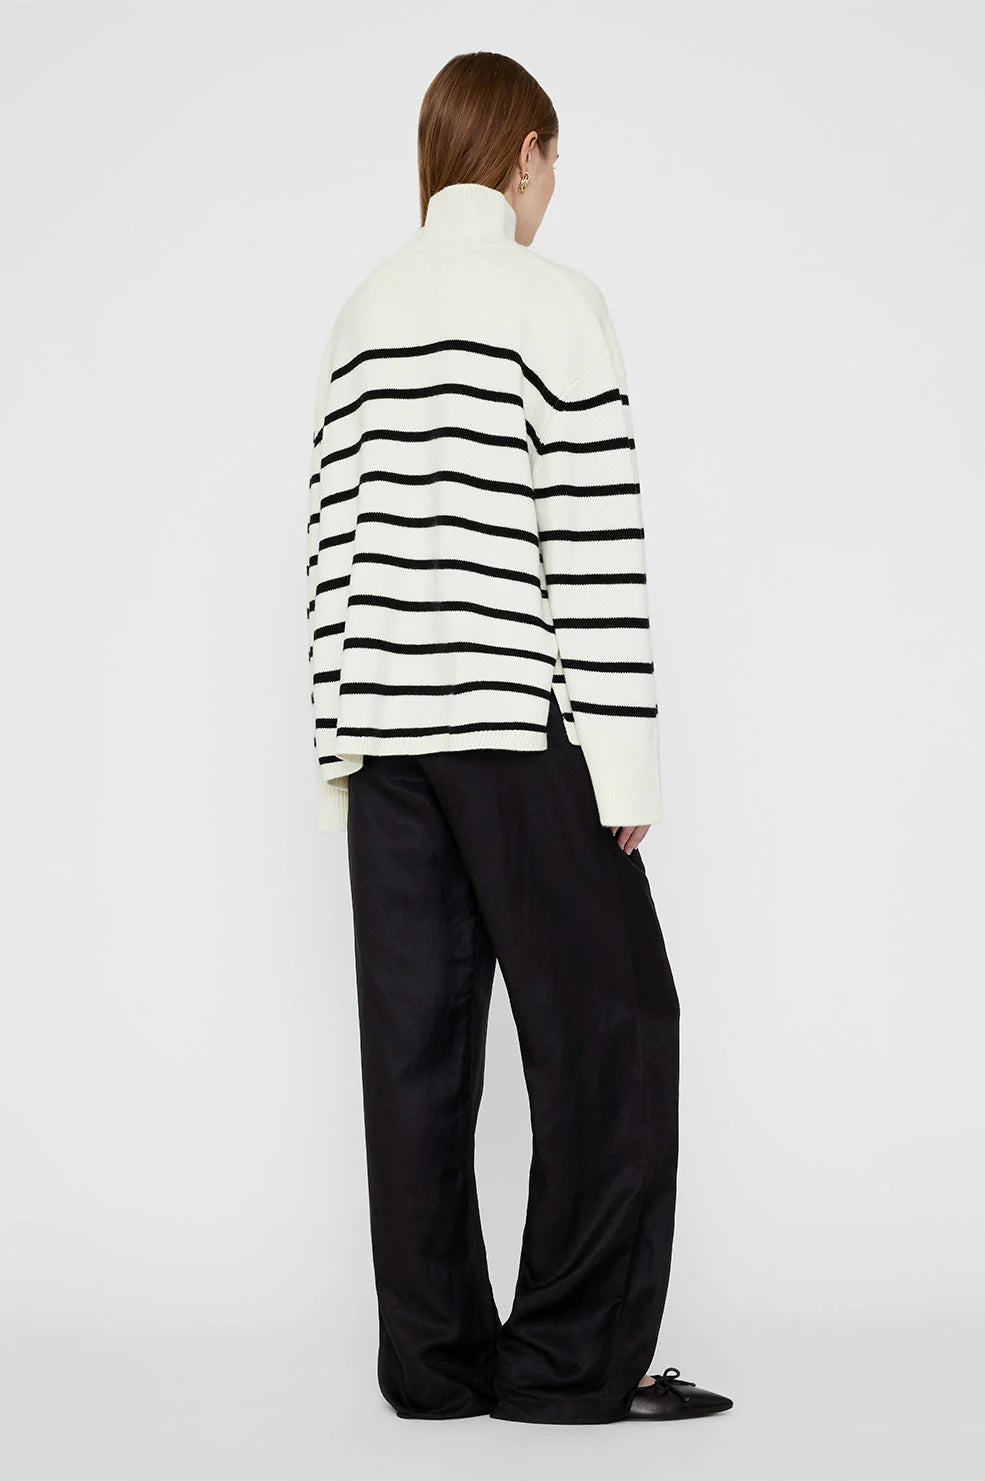 Courtney Sweater in Ivory and Black Stripe